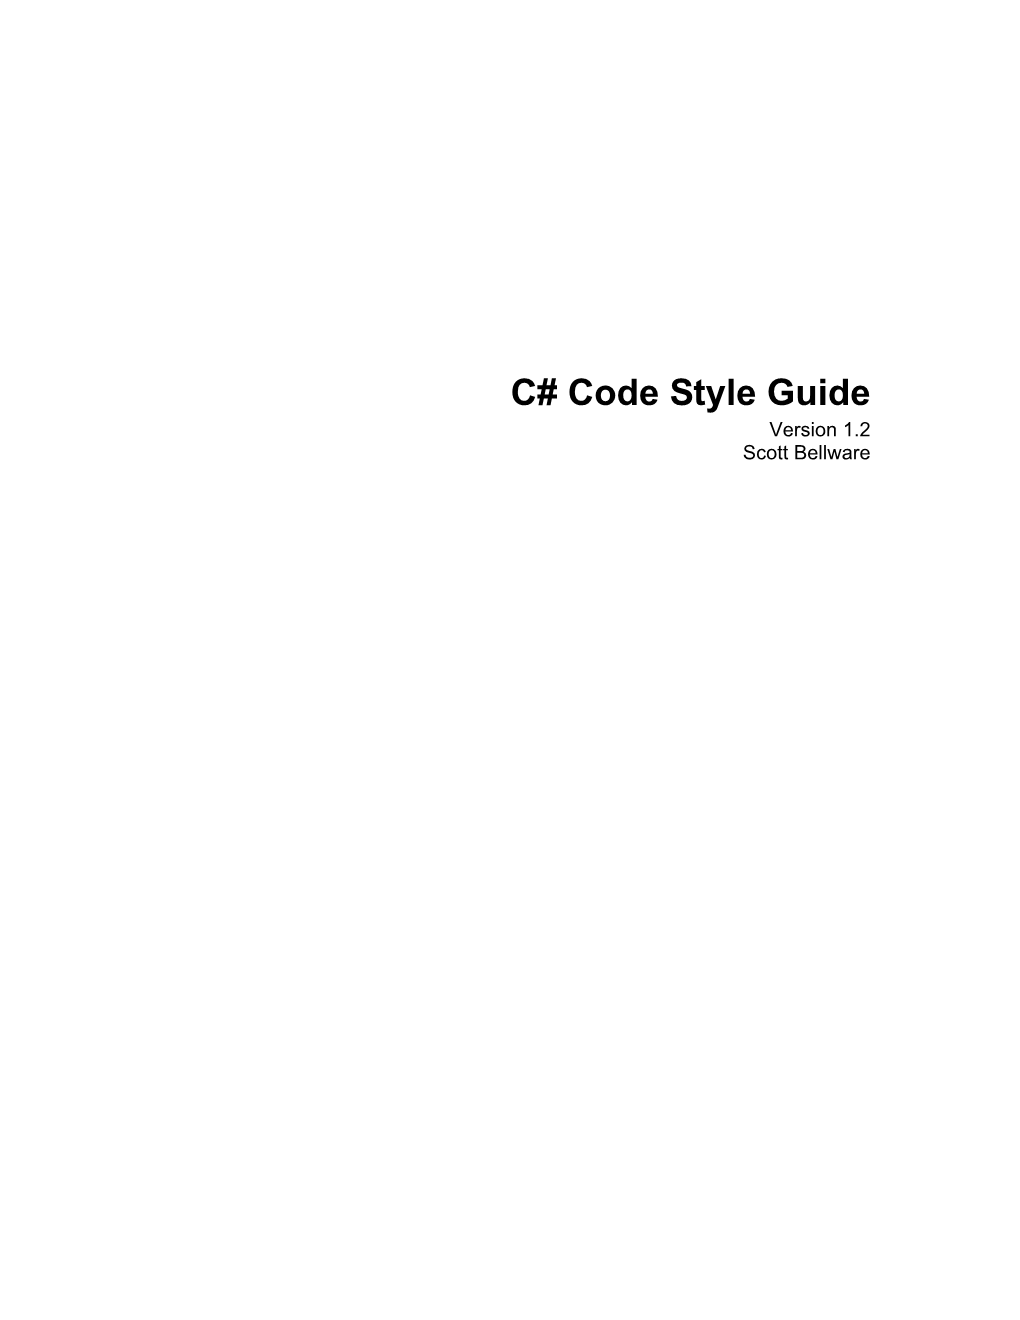 C# Code Style Guide